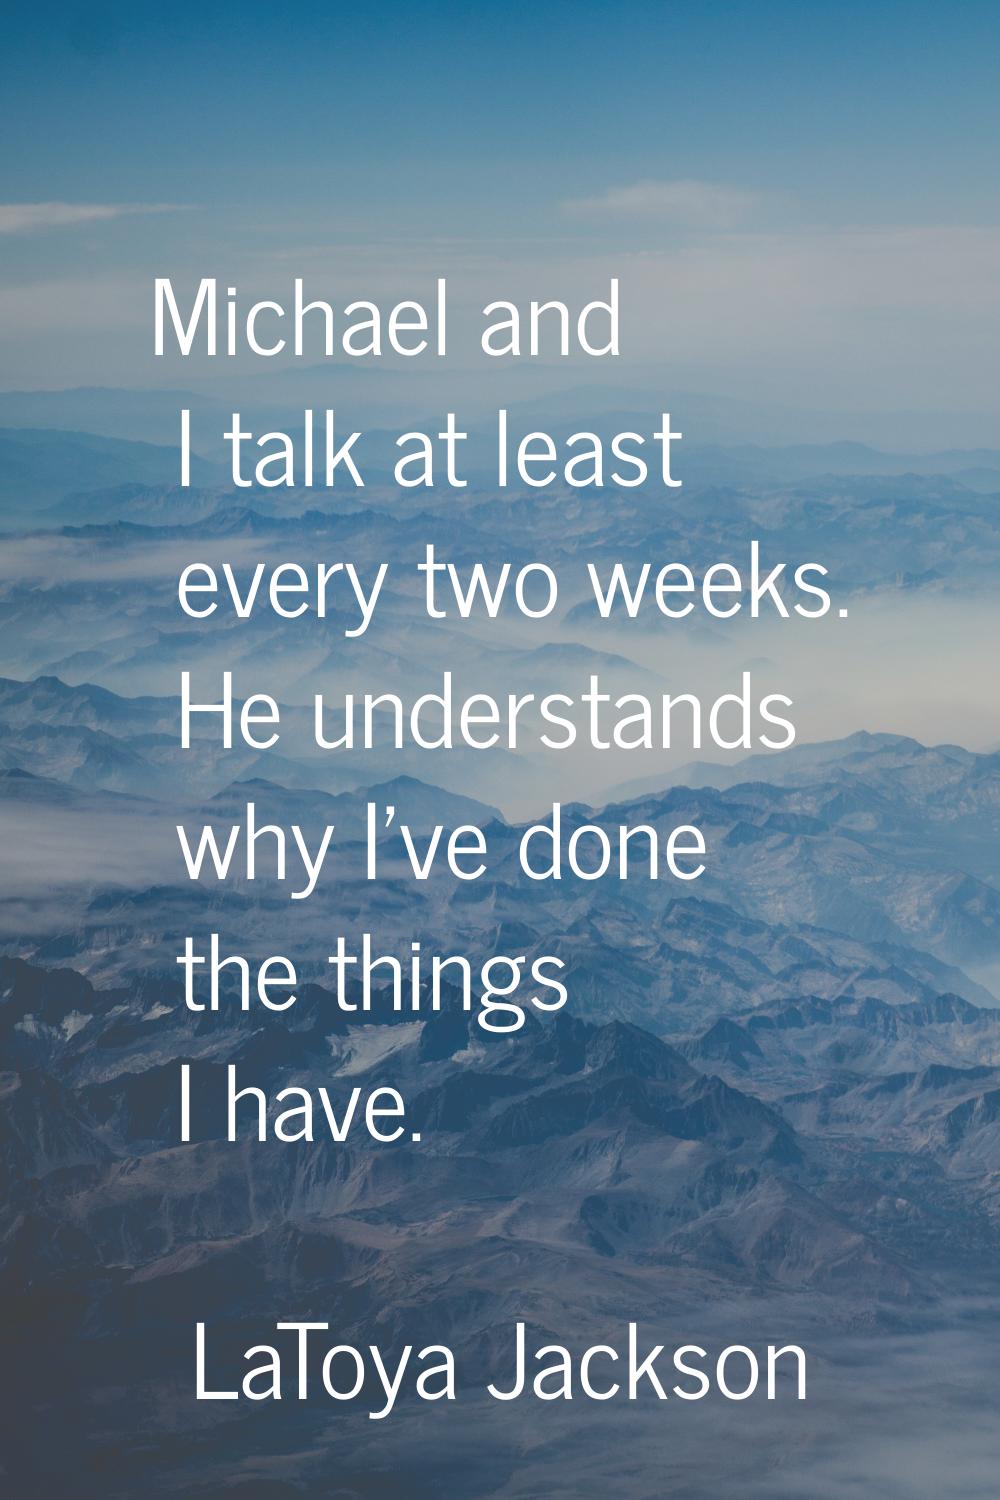 Michael and I talk at least every two weeks. He understands why I've done the things I have.